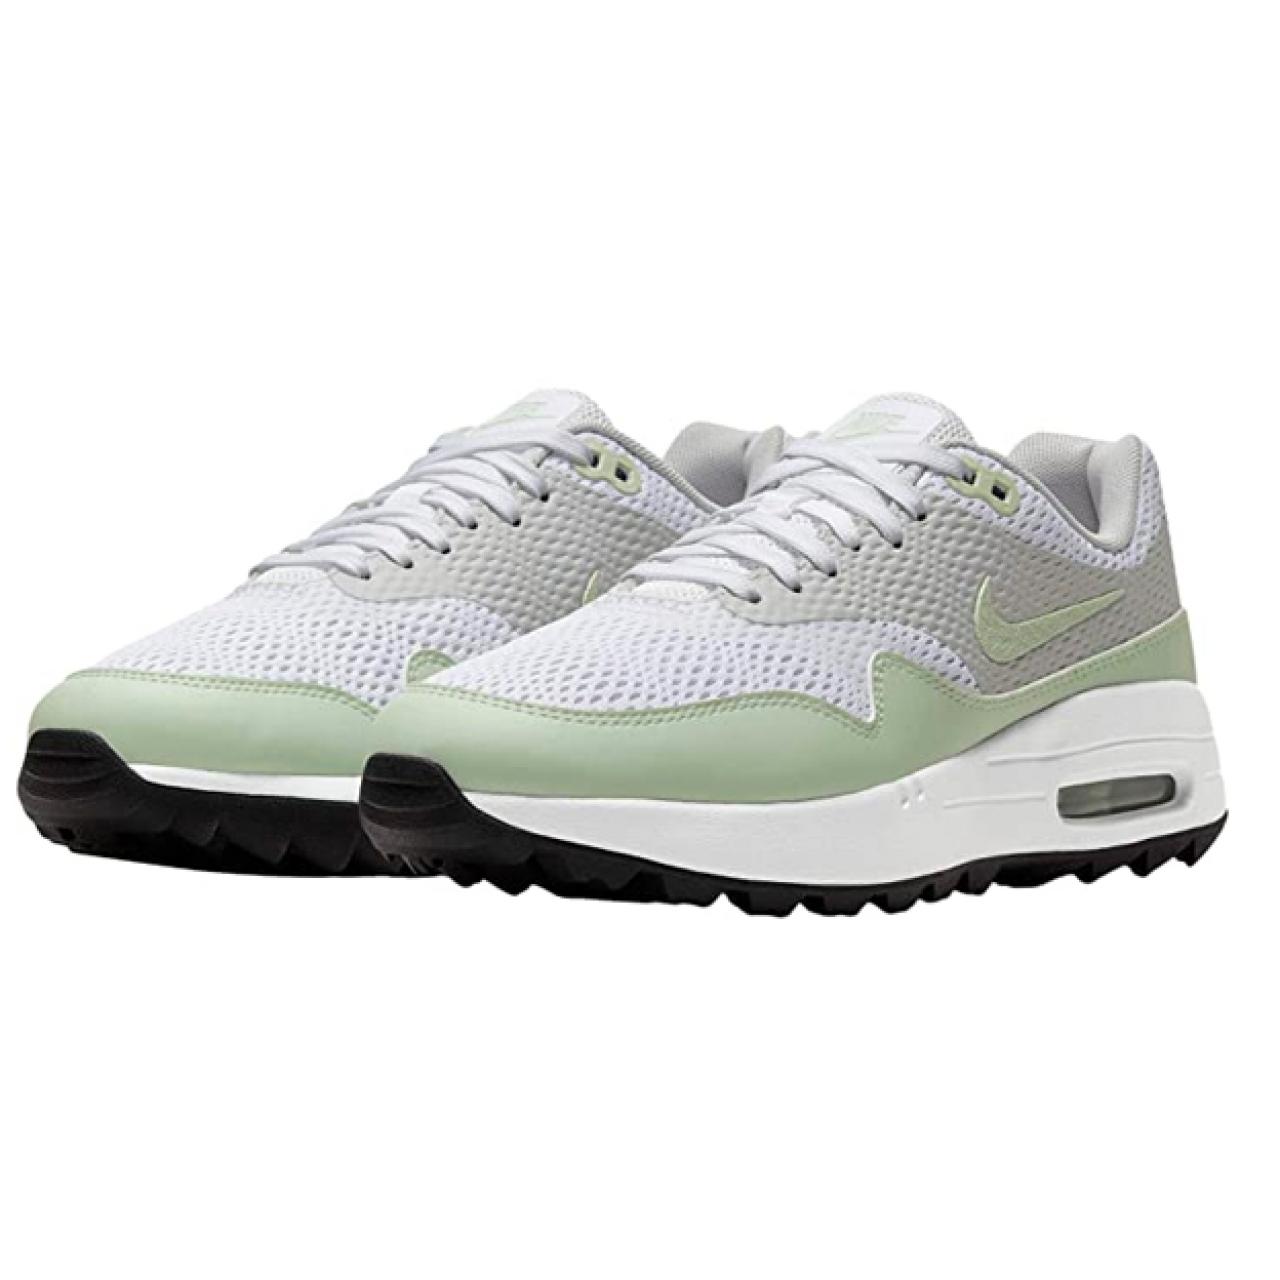 12 pairs of women's golf shoes on sale right now | Golf Equipment 